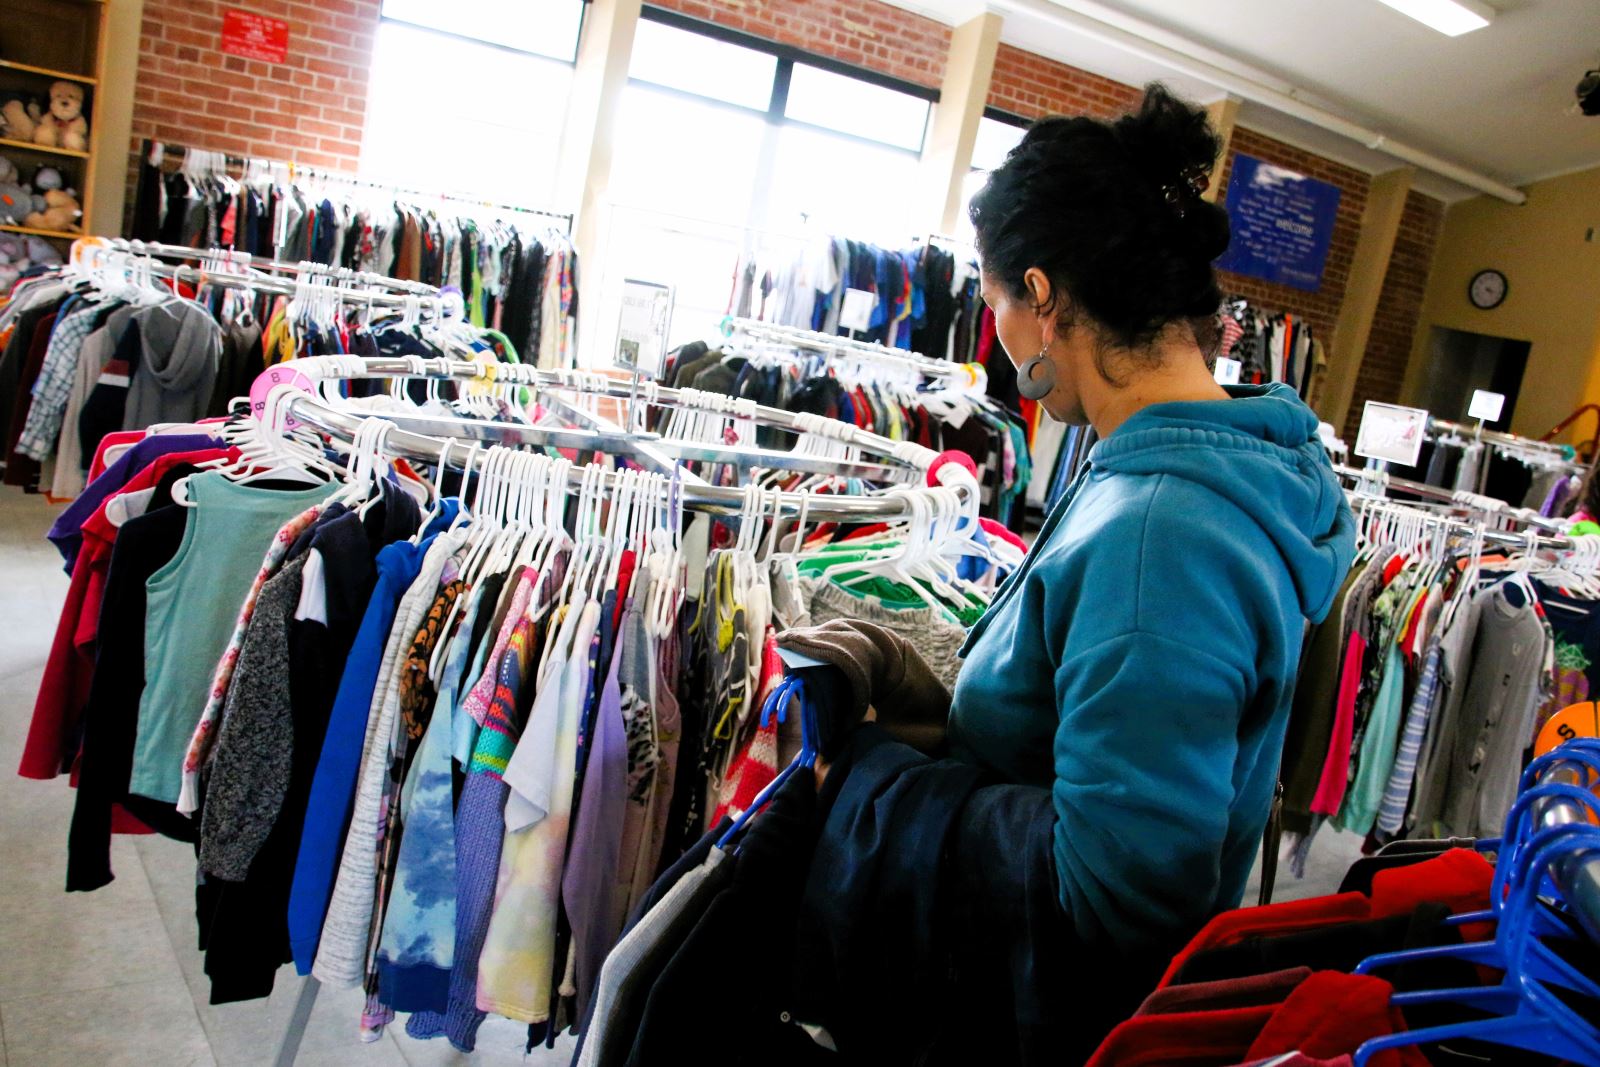 A woman browses the clothing racks at the Duffy Clothing Bank.